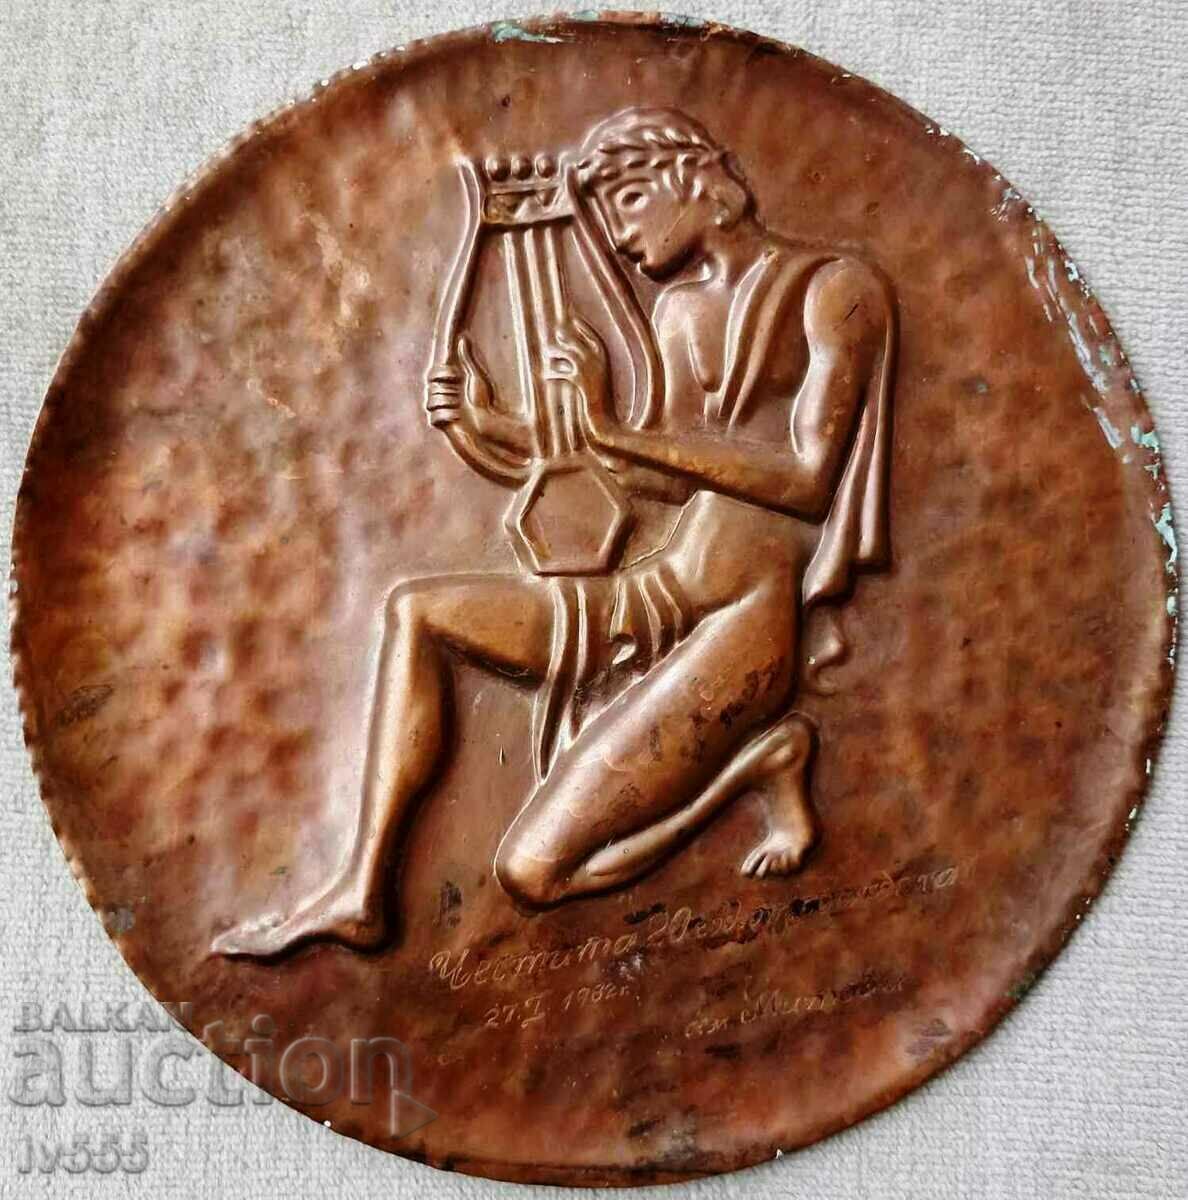 FOR SALE OLD BULGARIAN COPPER PANEL - ORPHEUS WITH HARP 1982'